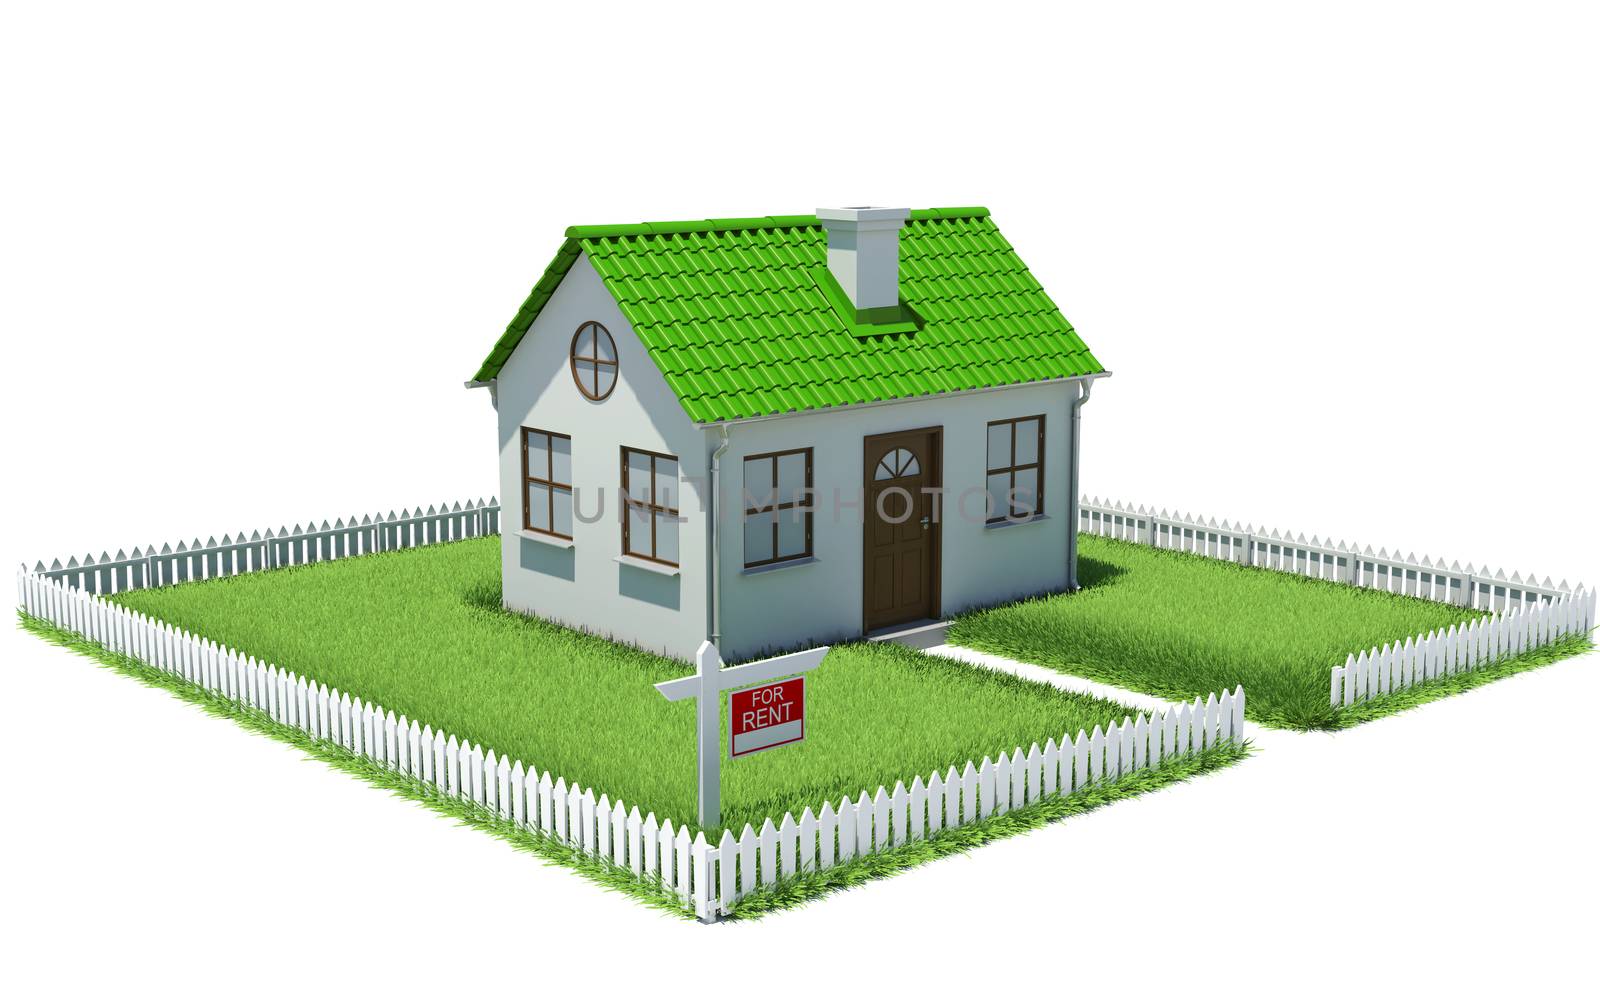 House on plot of grass with fence. Architectural concept